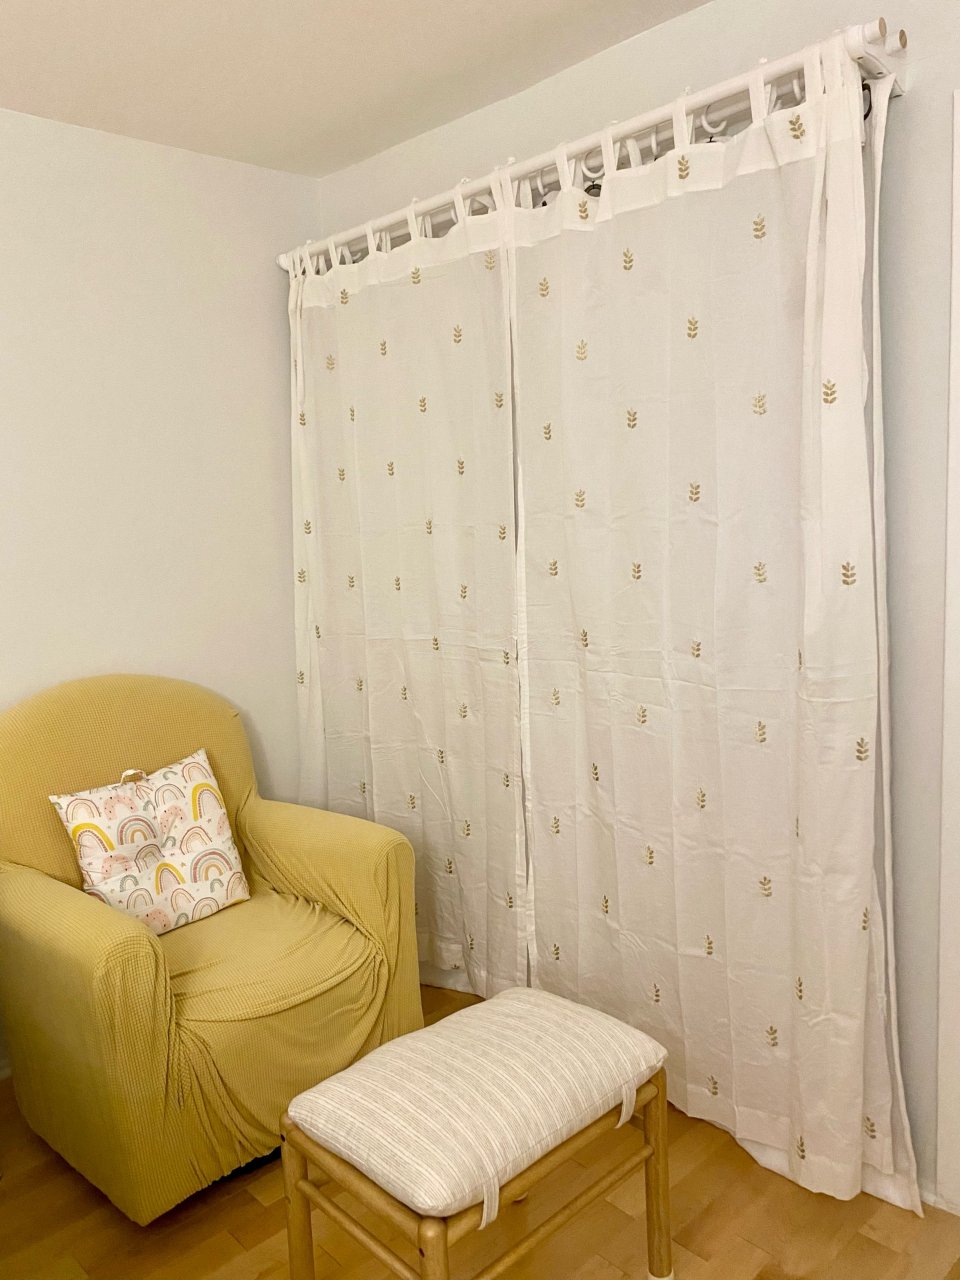 BBB 透光窗帘 Wild Sage™ Leslie Embroidered Tab Top Sheer Window Curtain Panel in Ivory | Bed Bath & Beyond,Target 脚凳 Emery Wood And Upholstered Ottoman With Straps Cream/light Brown Stripe - Threshold™ Designed With Studio Mcgee : Target